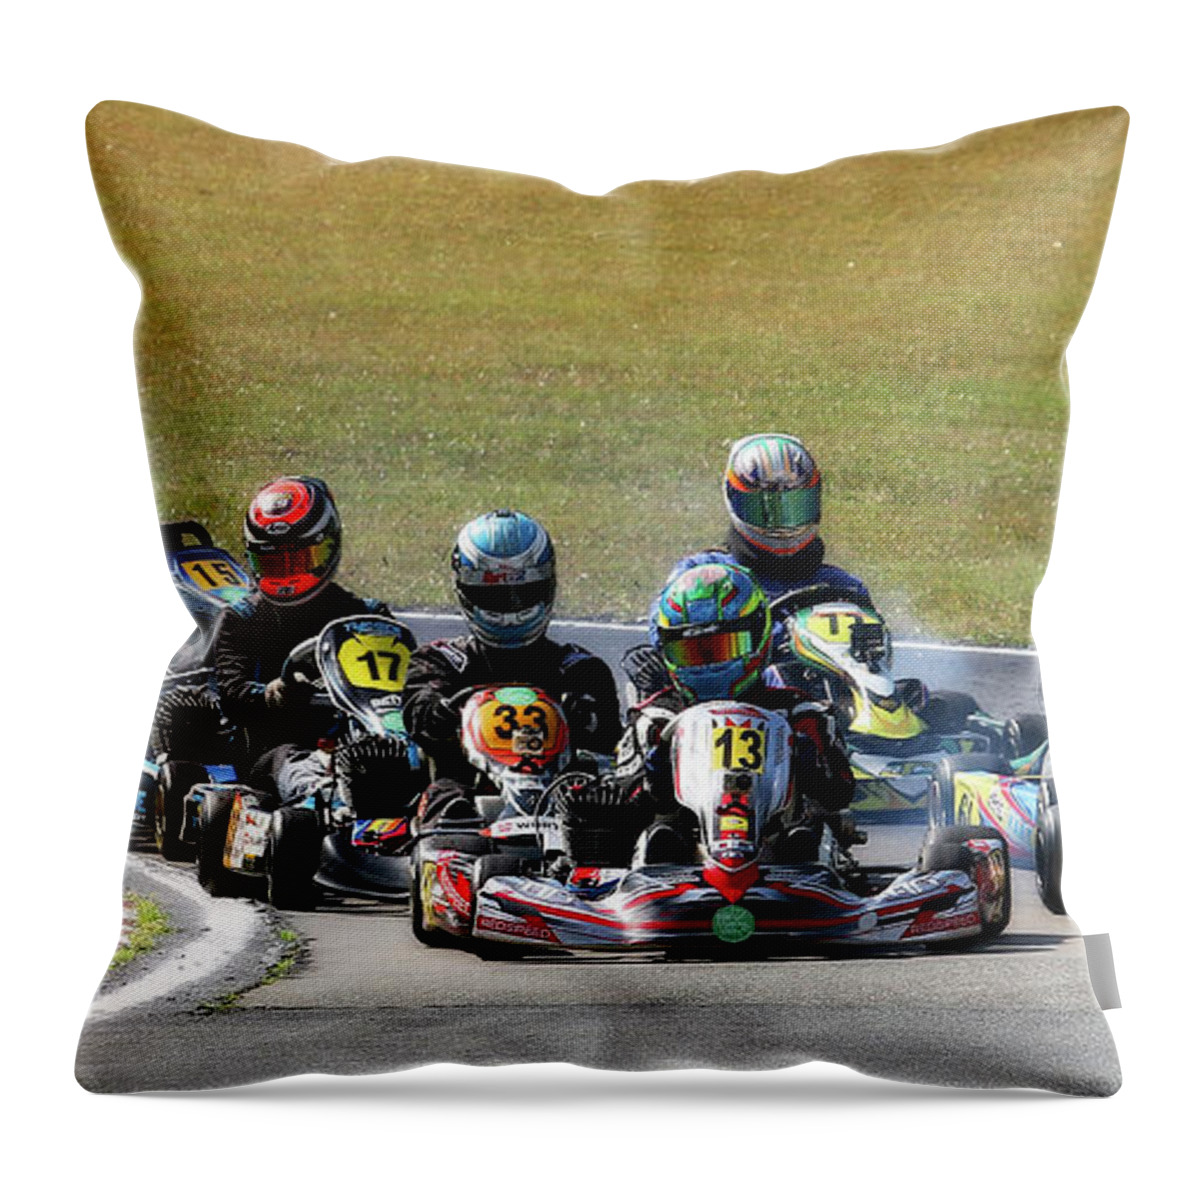 Wingham Go Karts Throw Pillow featuring the photograph Wingham Go Karts 06 by Kevin Chippindall